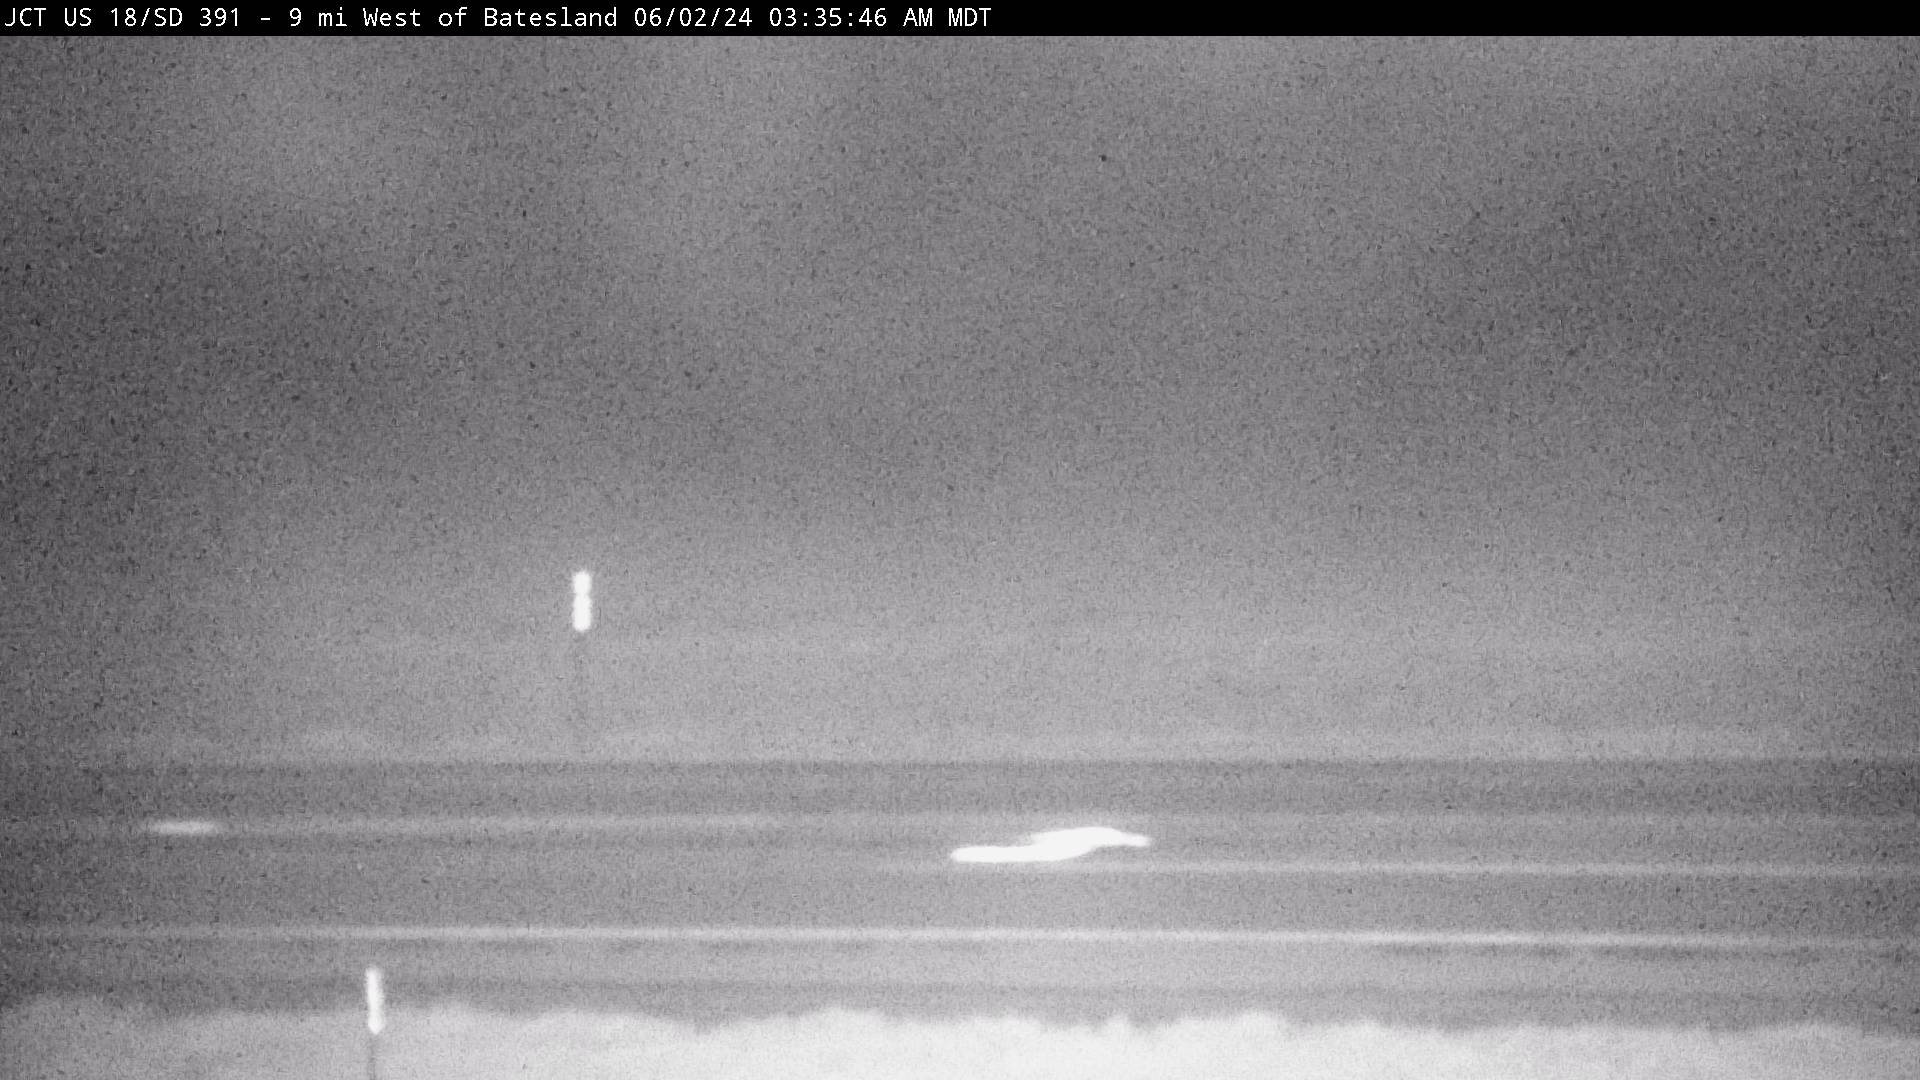 Southwest of town at junction US-18 & SD-391 - North Traffic Camera